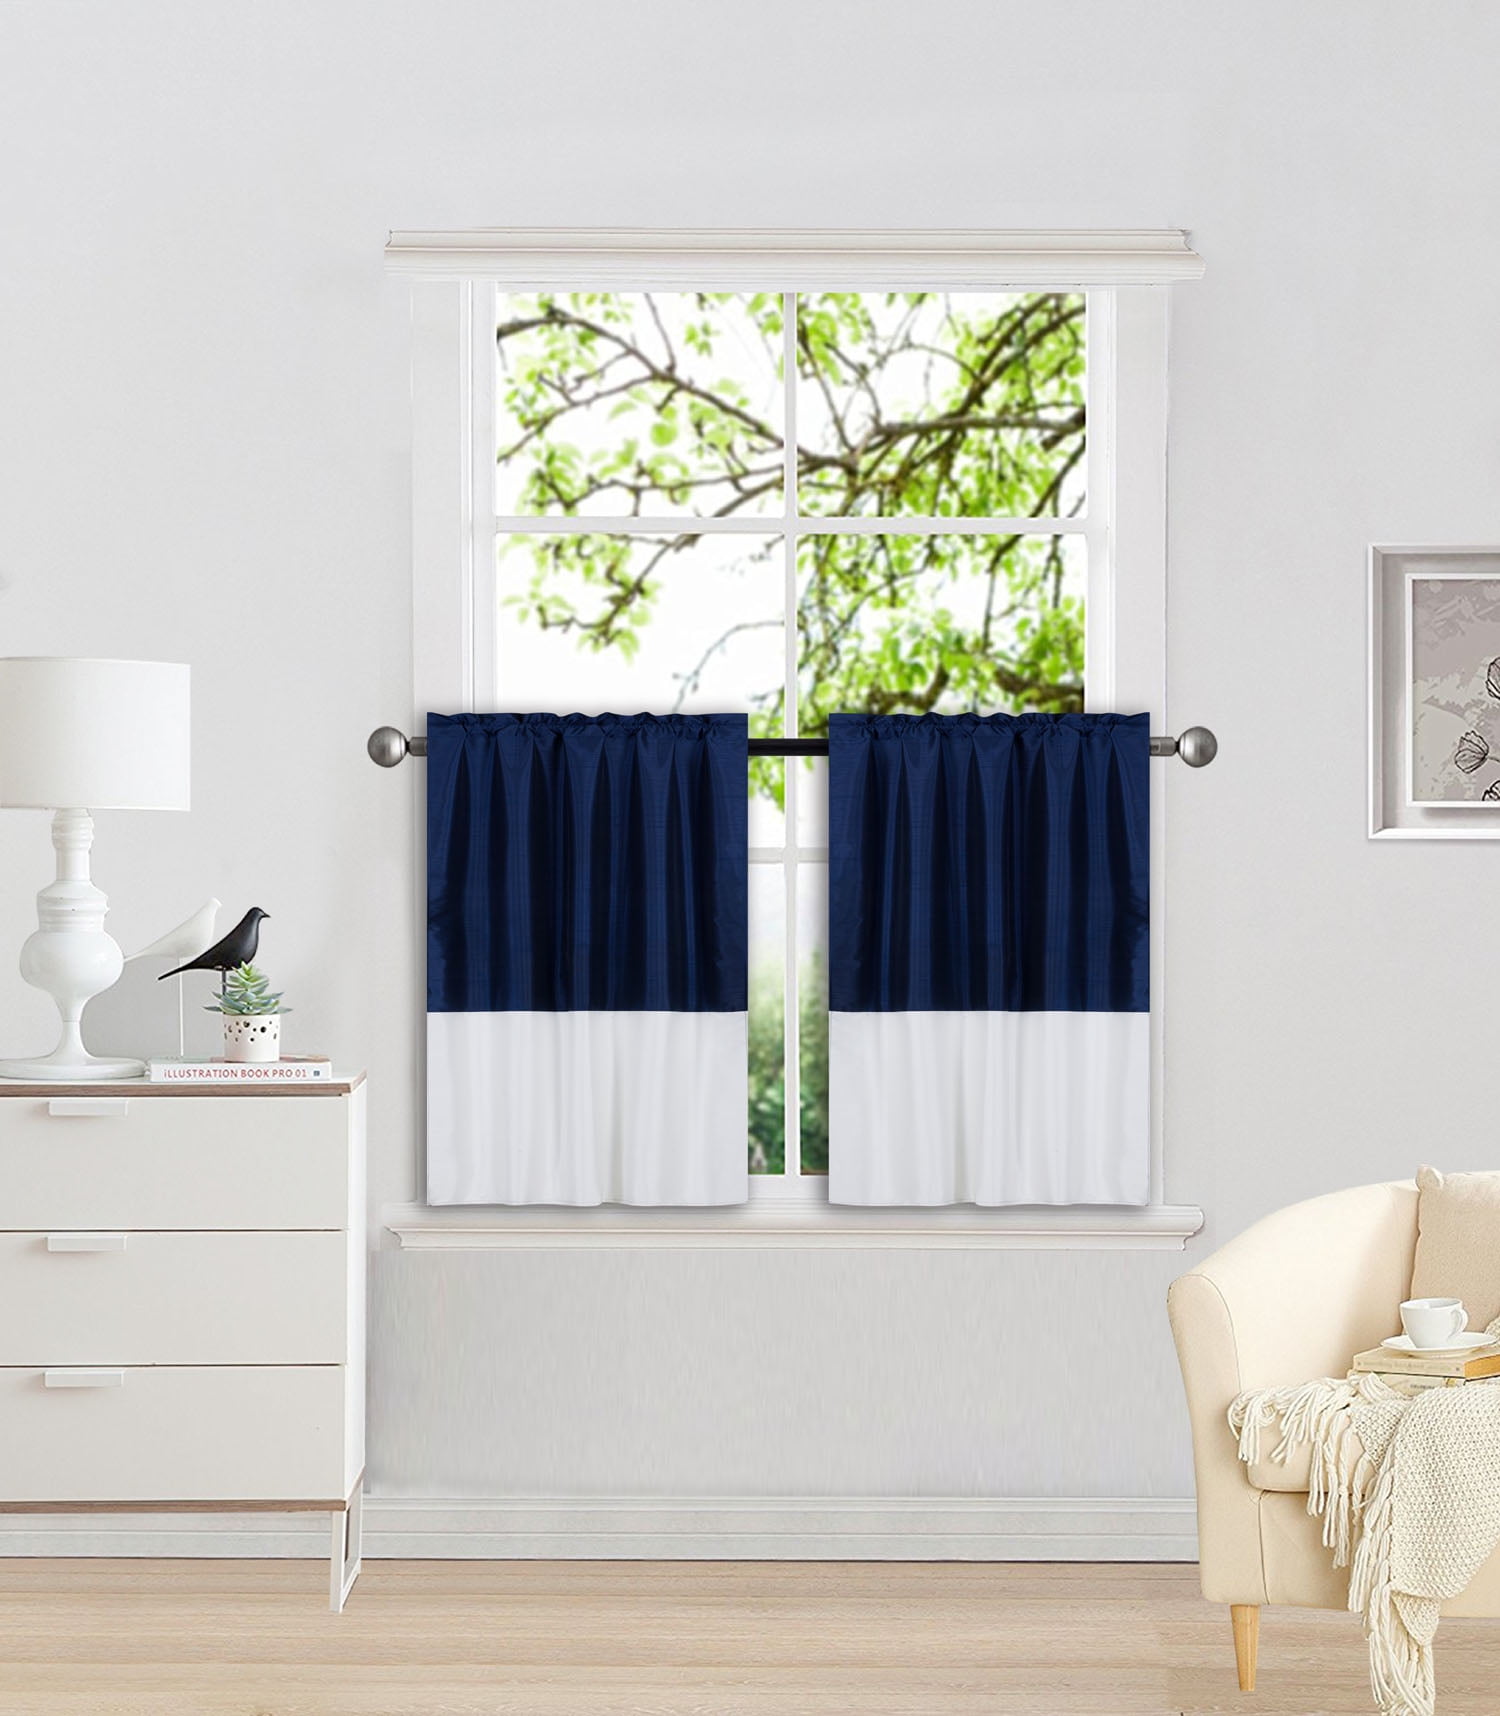 1 SET ANY CURTAIN SEMI SHEER ROD POCKET PANEL 2 TONE SOLID COLORS NAVY / IVORY CAN SEE THRU TREATMENT WINDOW KITCHEN, BATHROOM SIZE 30" WIDE X 36" LENGTH